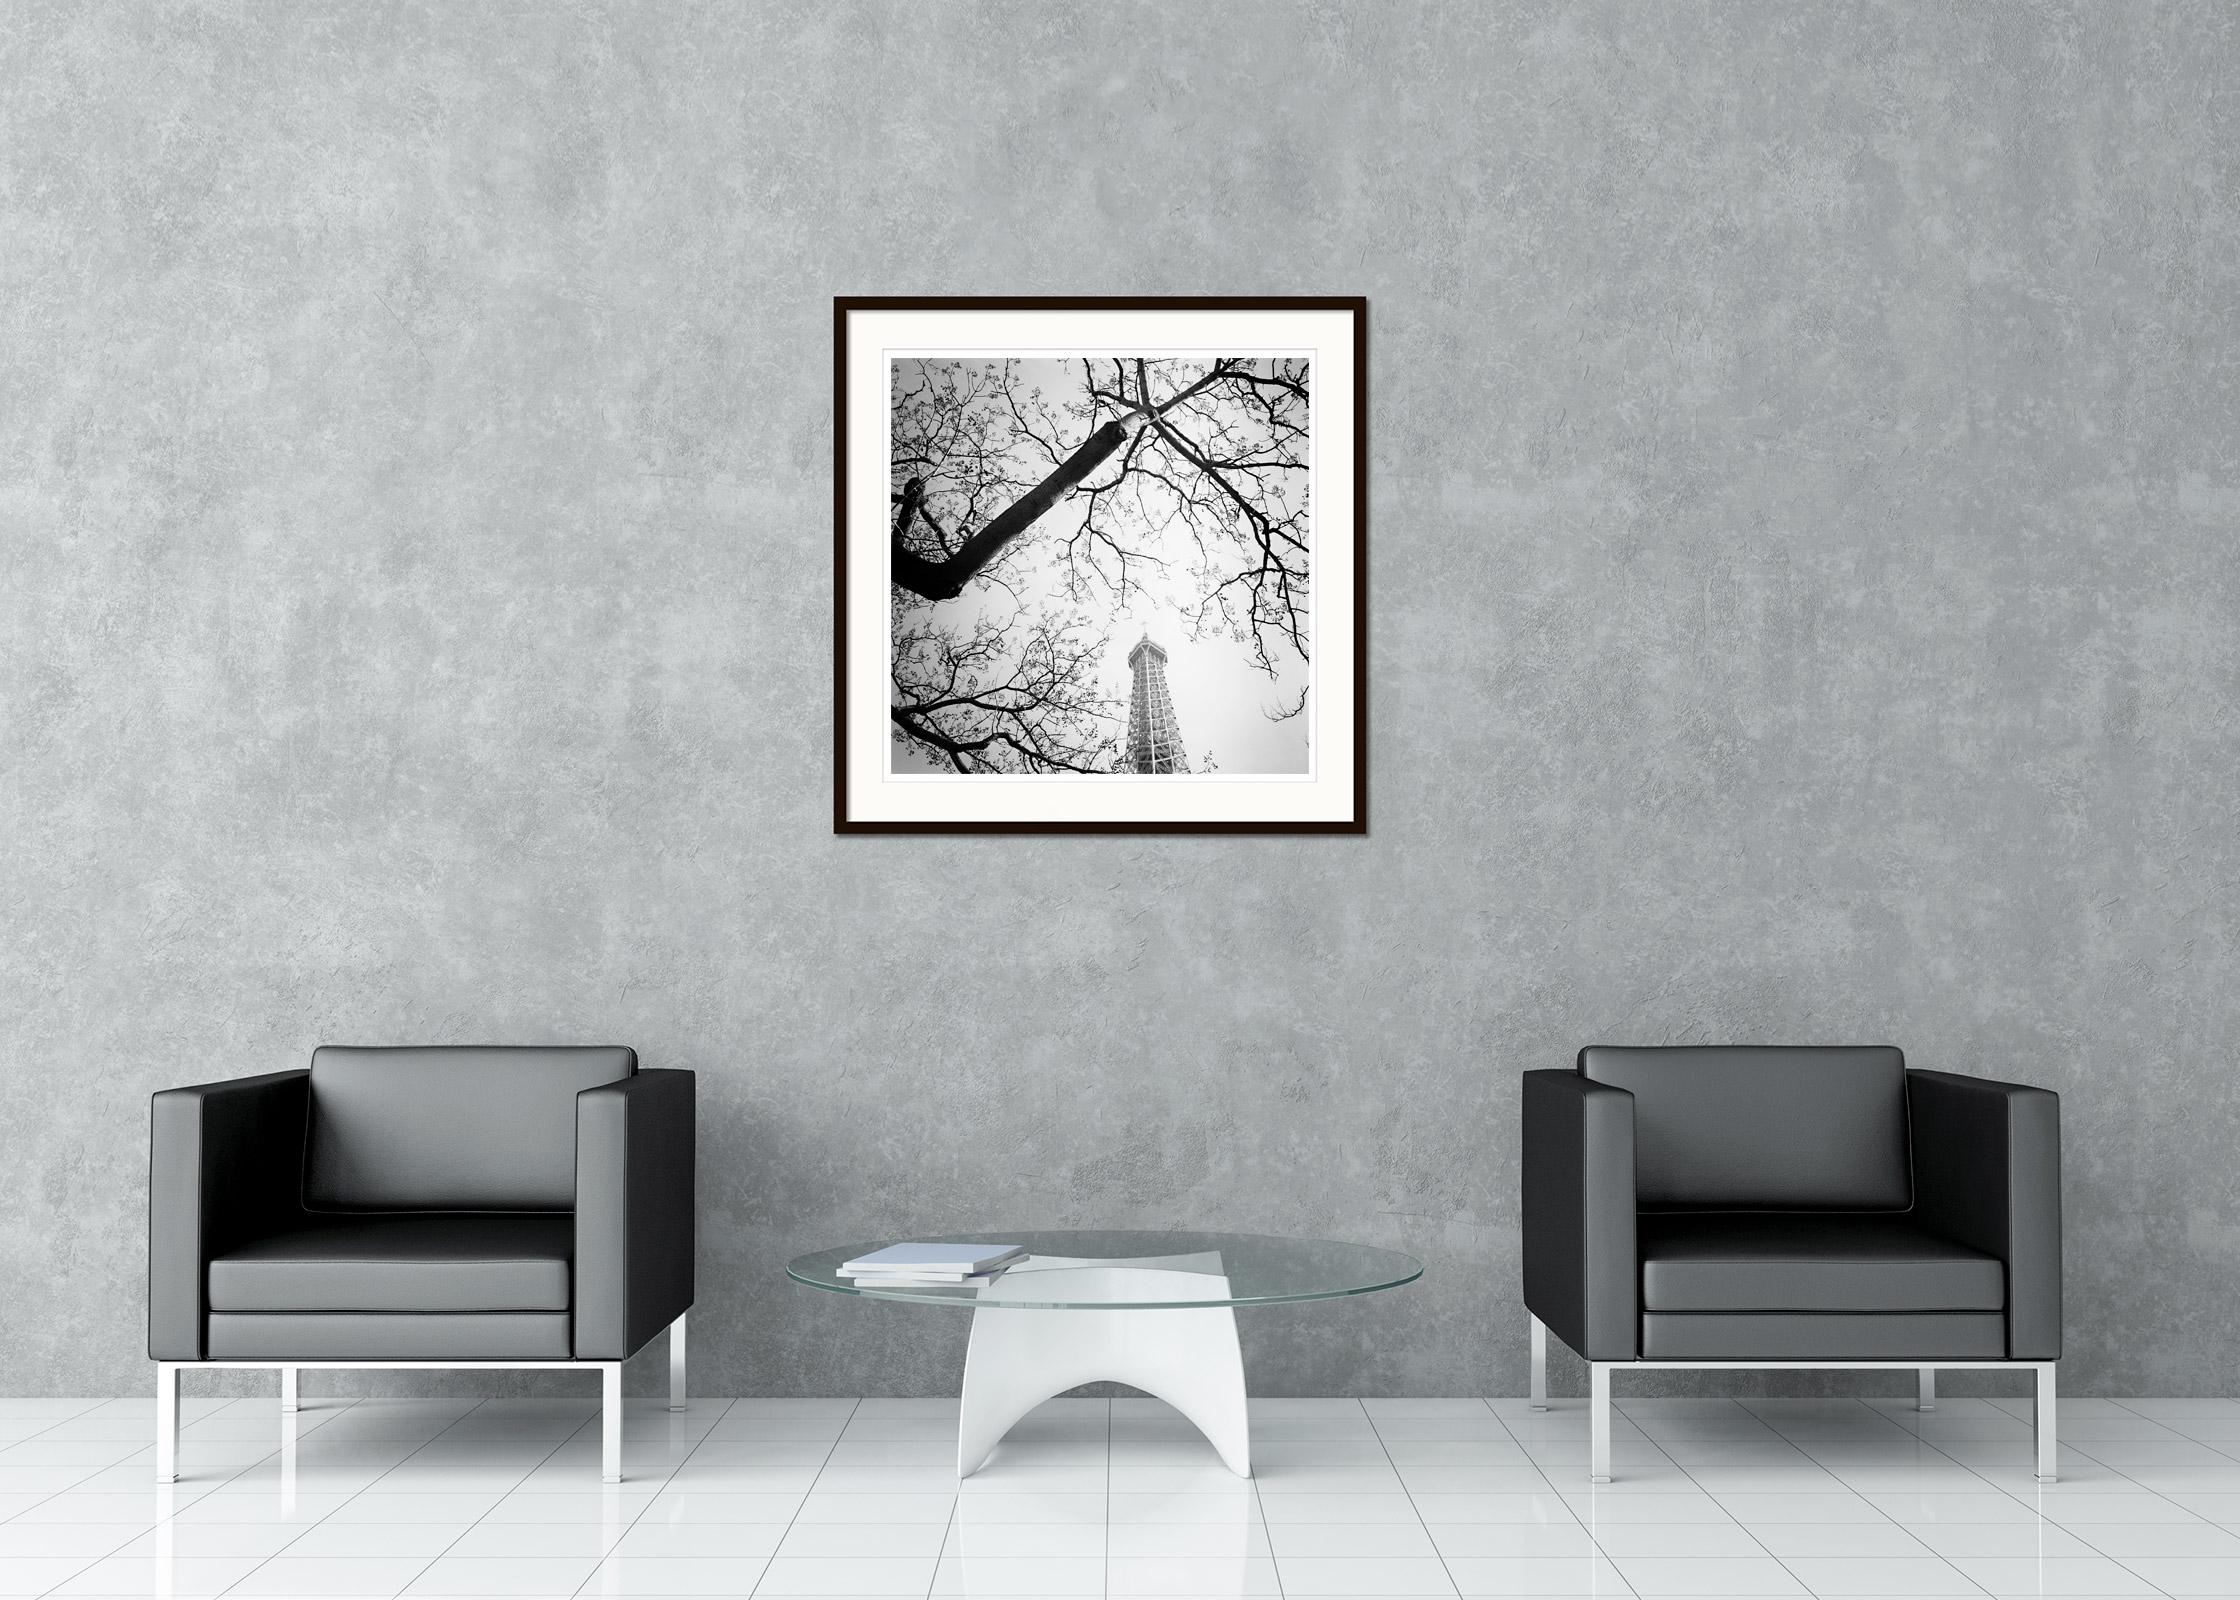 Black and white fine art cityscape photography. Archival pigment ink print, edition of 9. Signed, titled, dated and numbered by artist. Certificate of authenticity included. Printed with 4cm white border. 
International award winner photographer